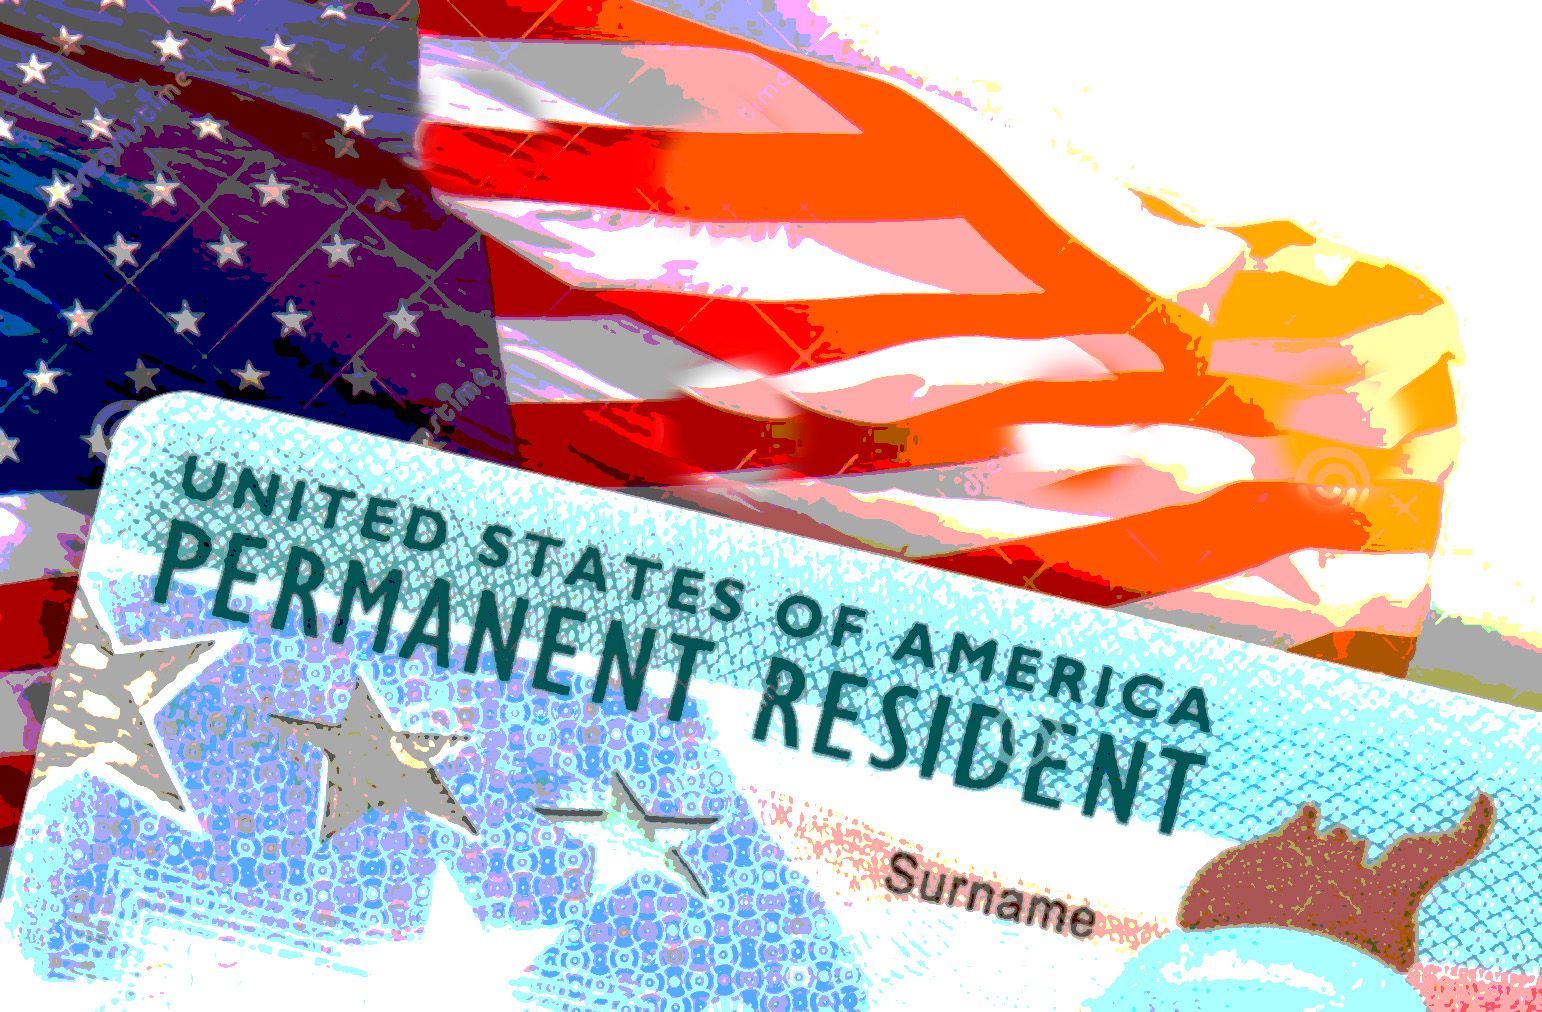 Green card us permanent resident card usa electronic diversity visa lottery dv dv lottery results united states america green 197881416